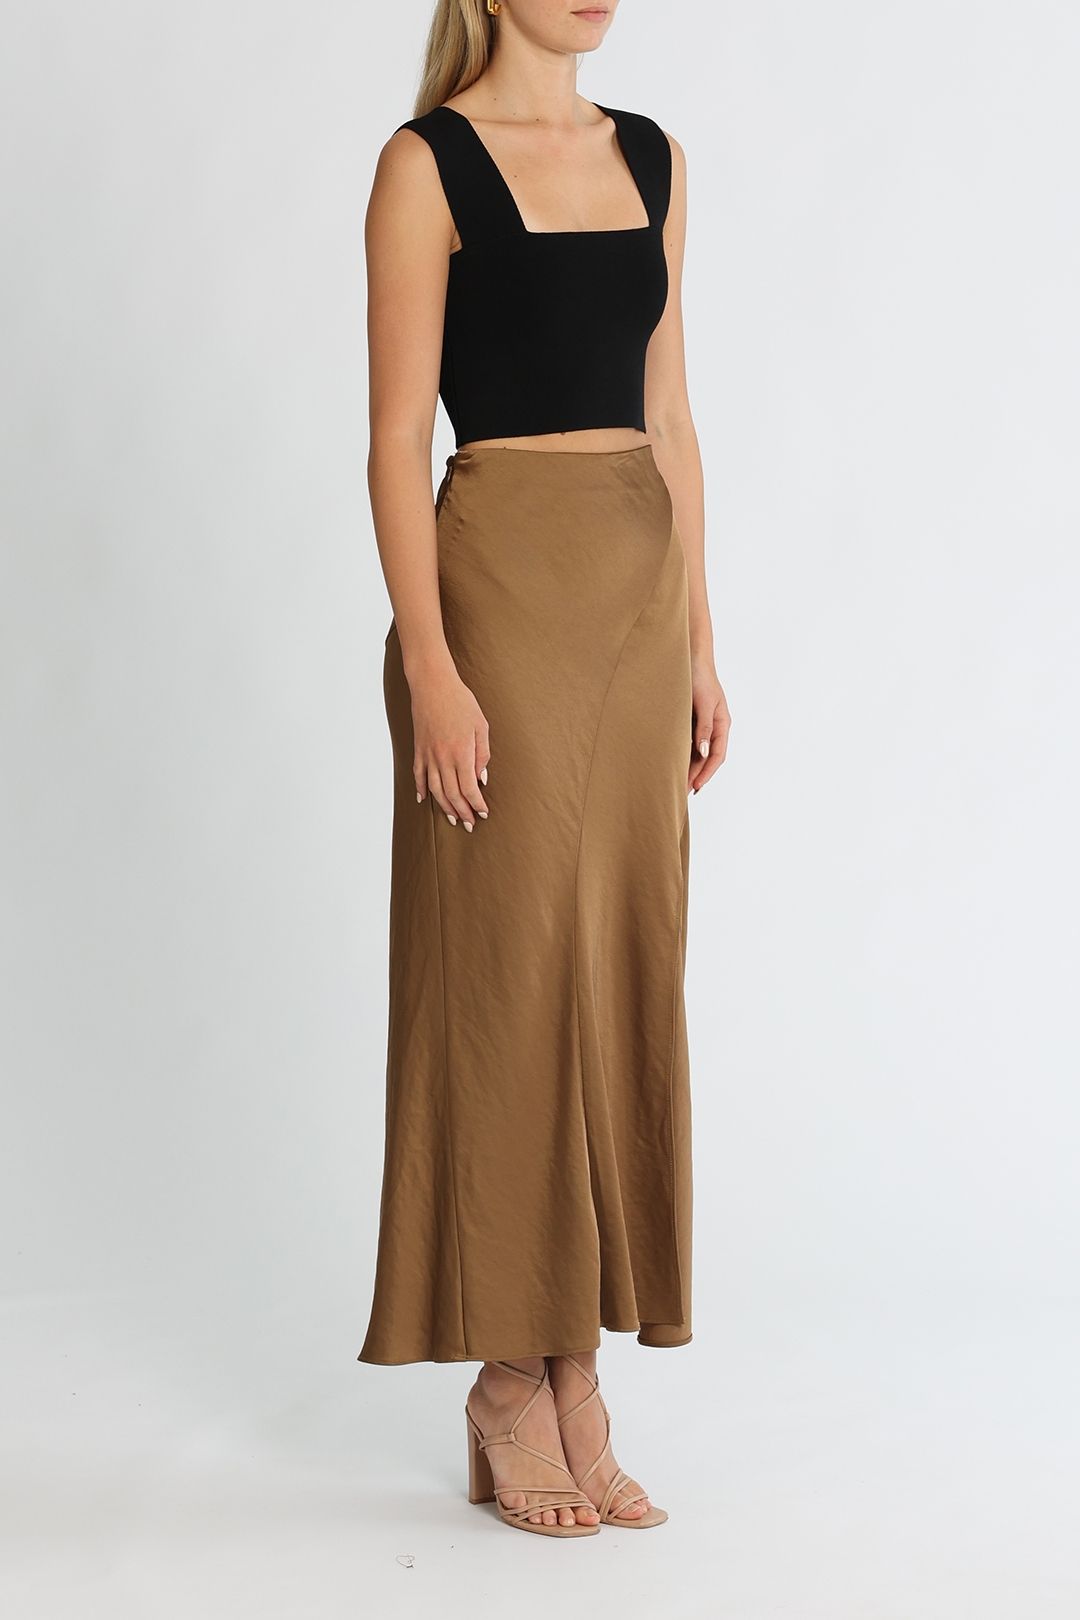 Significant Other Mimi Skirt Dark Gold Satin